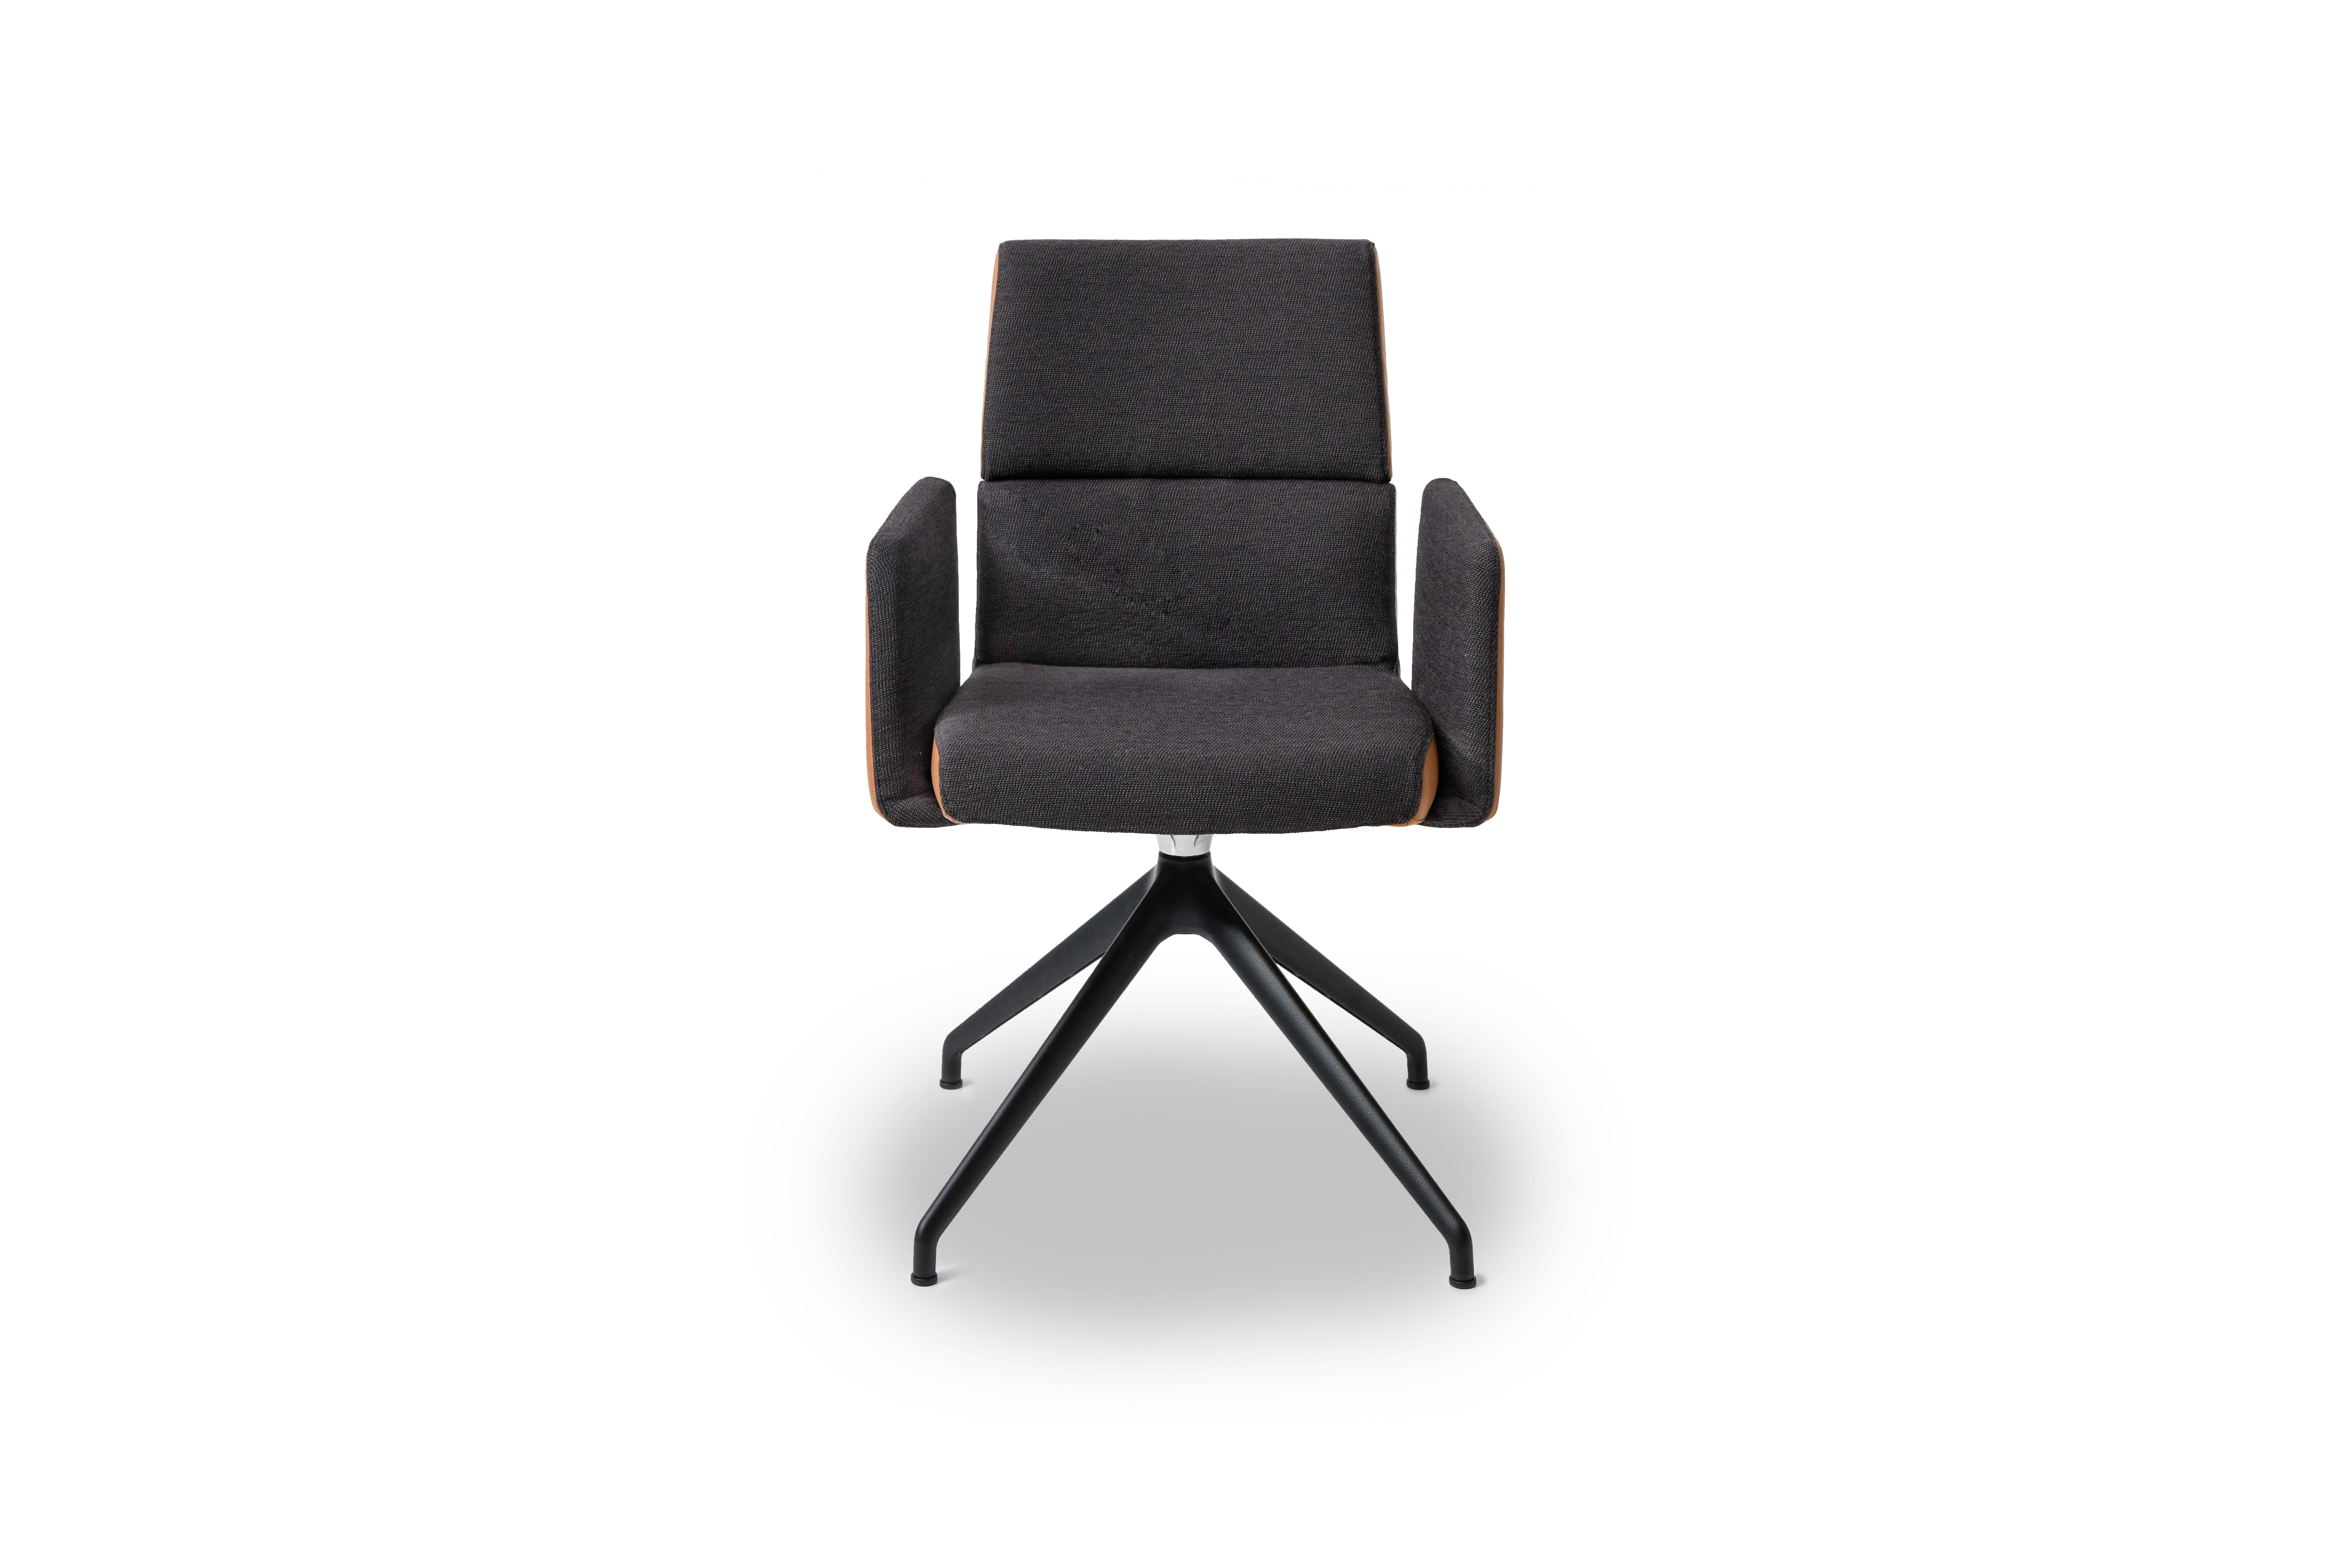 DS-414 chair by De Sede
Dimensions: D 60 x W 57 x H 88-97 cm
Materials: molded wood, leather

Prices may change according to the chosen materials and size. 

When the little brother suddenly grows up

DS-414 is a chair that follows the